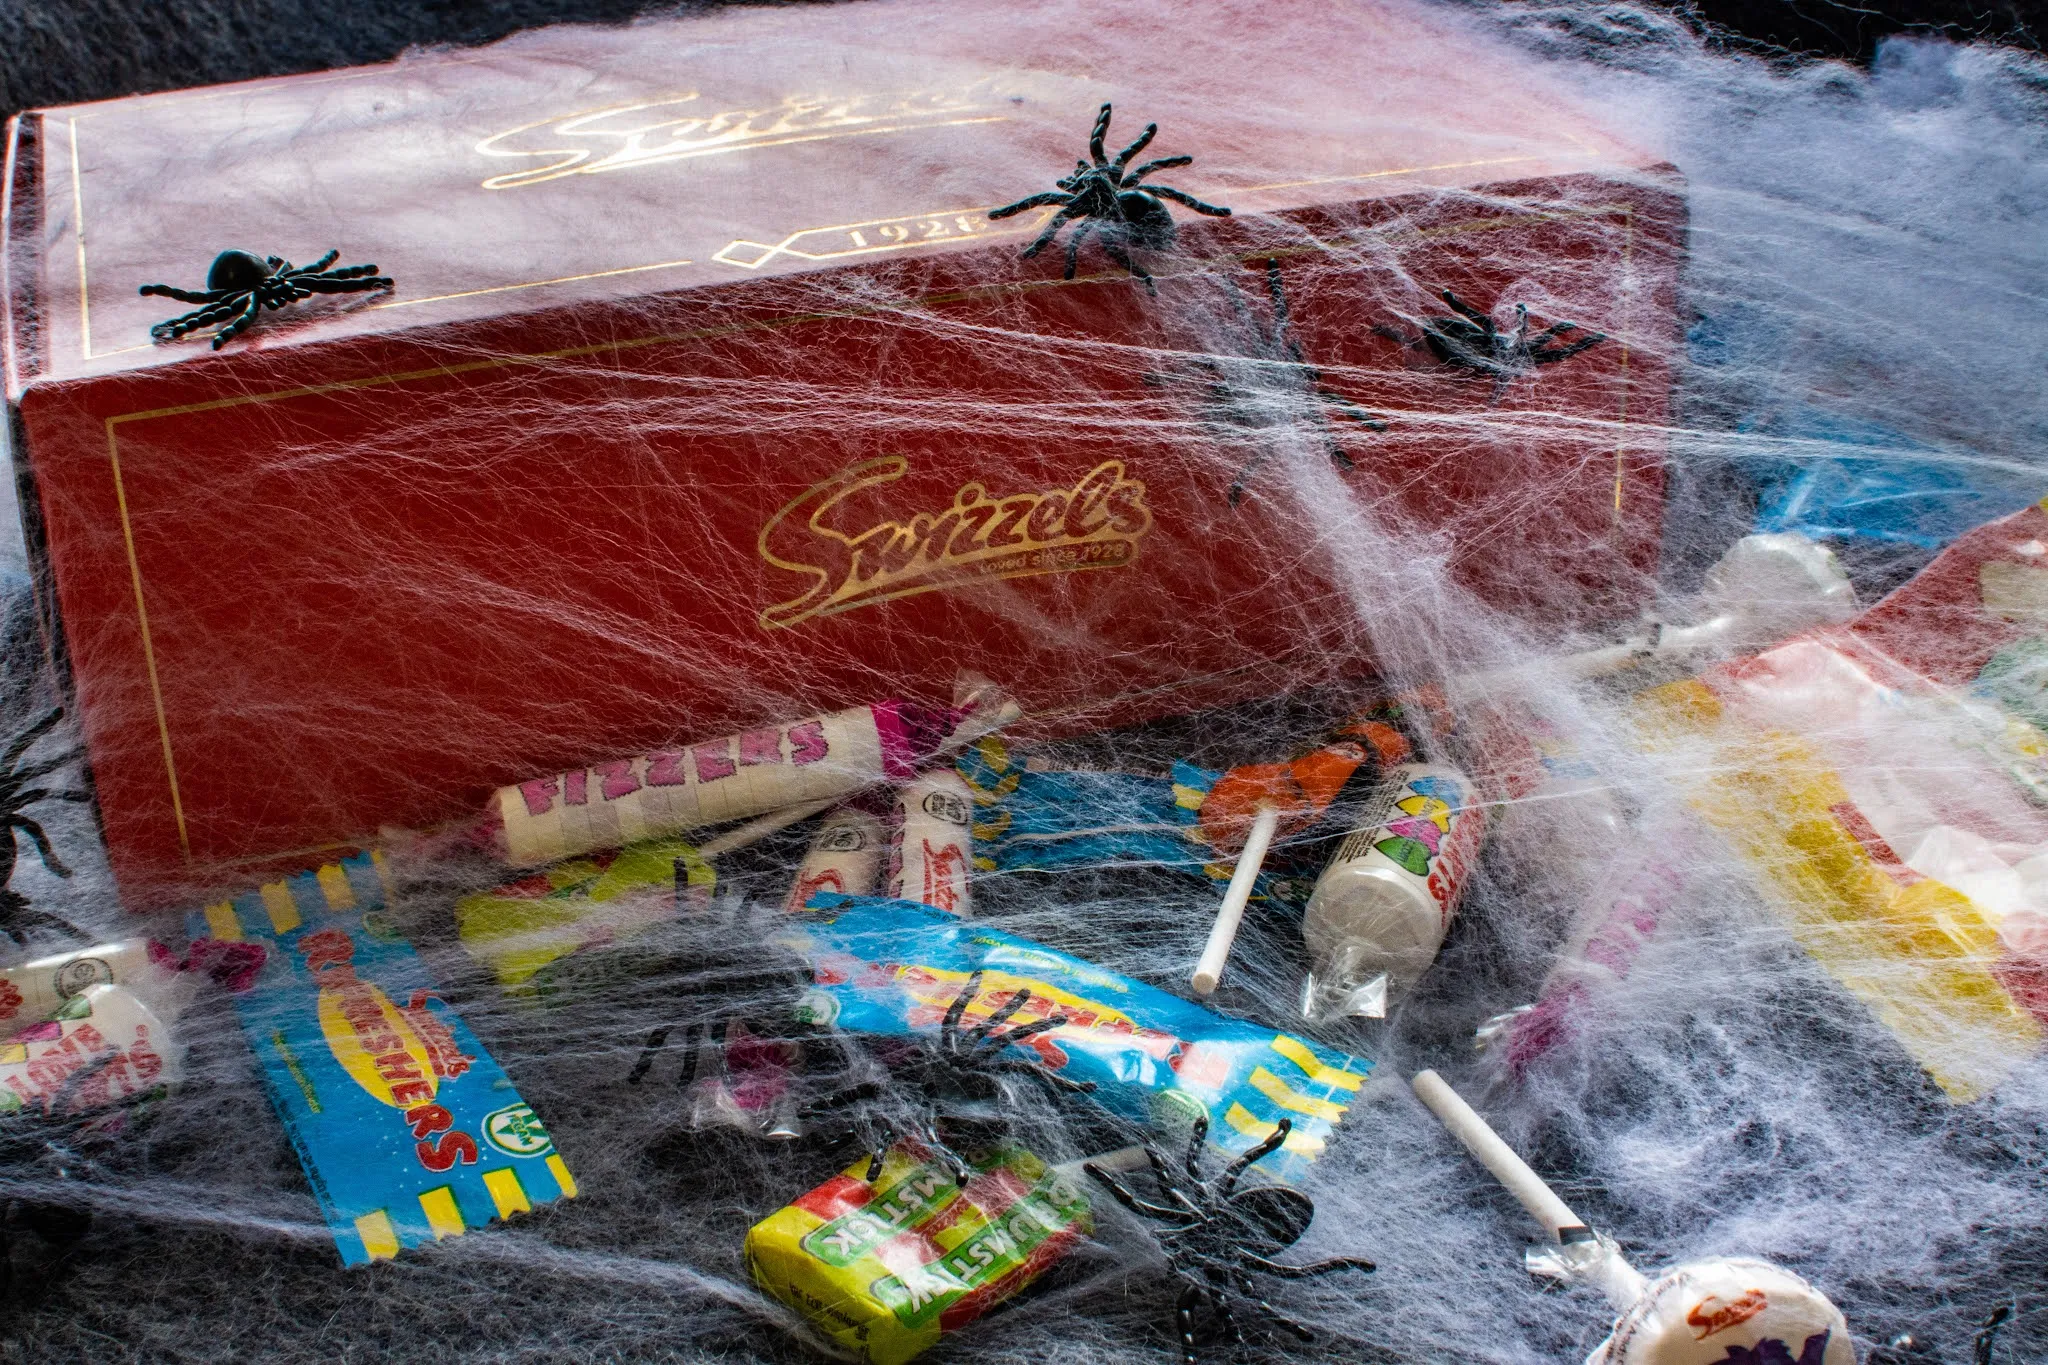 A Swizzels sweets hamper with Halloween decorations